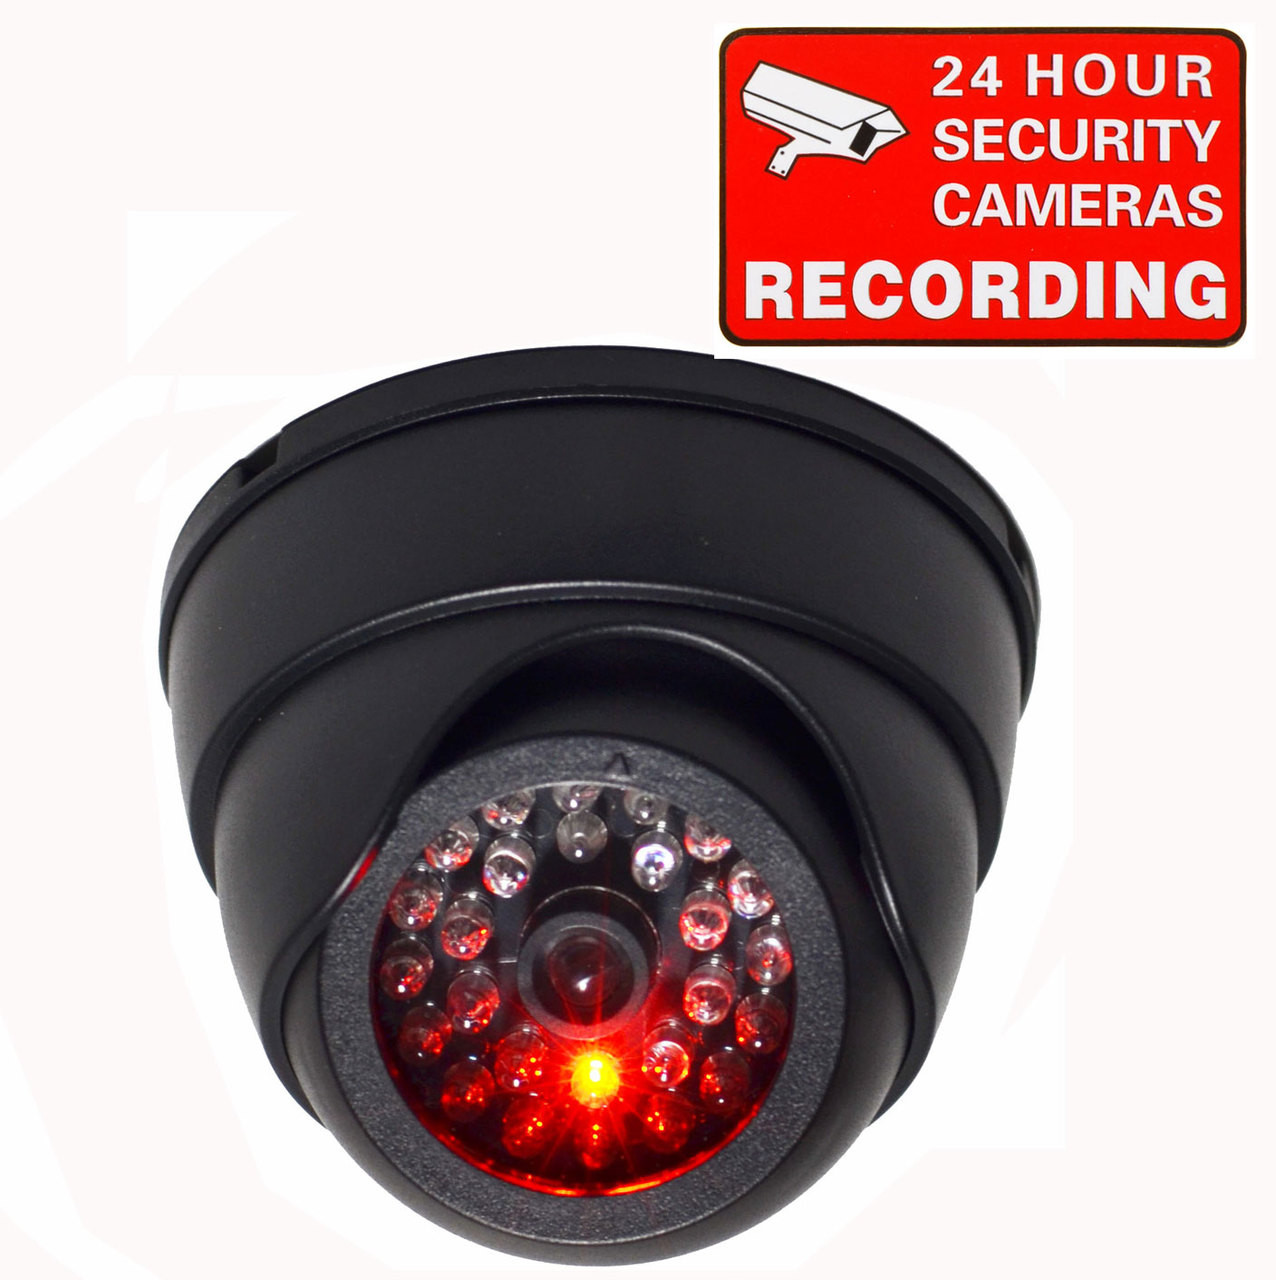 Dummy Fake Security Camera Dome Security Camera With Flashing Led 